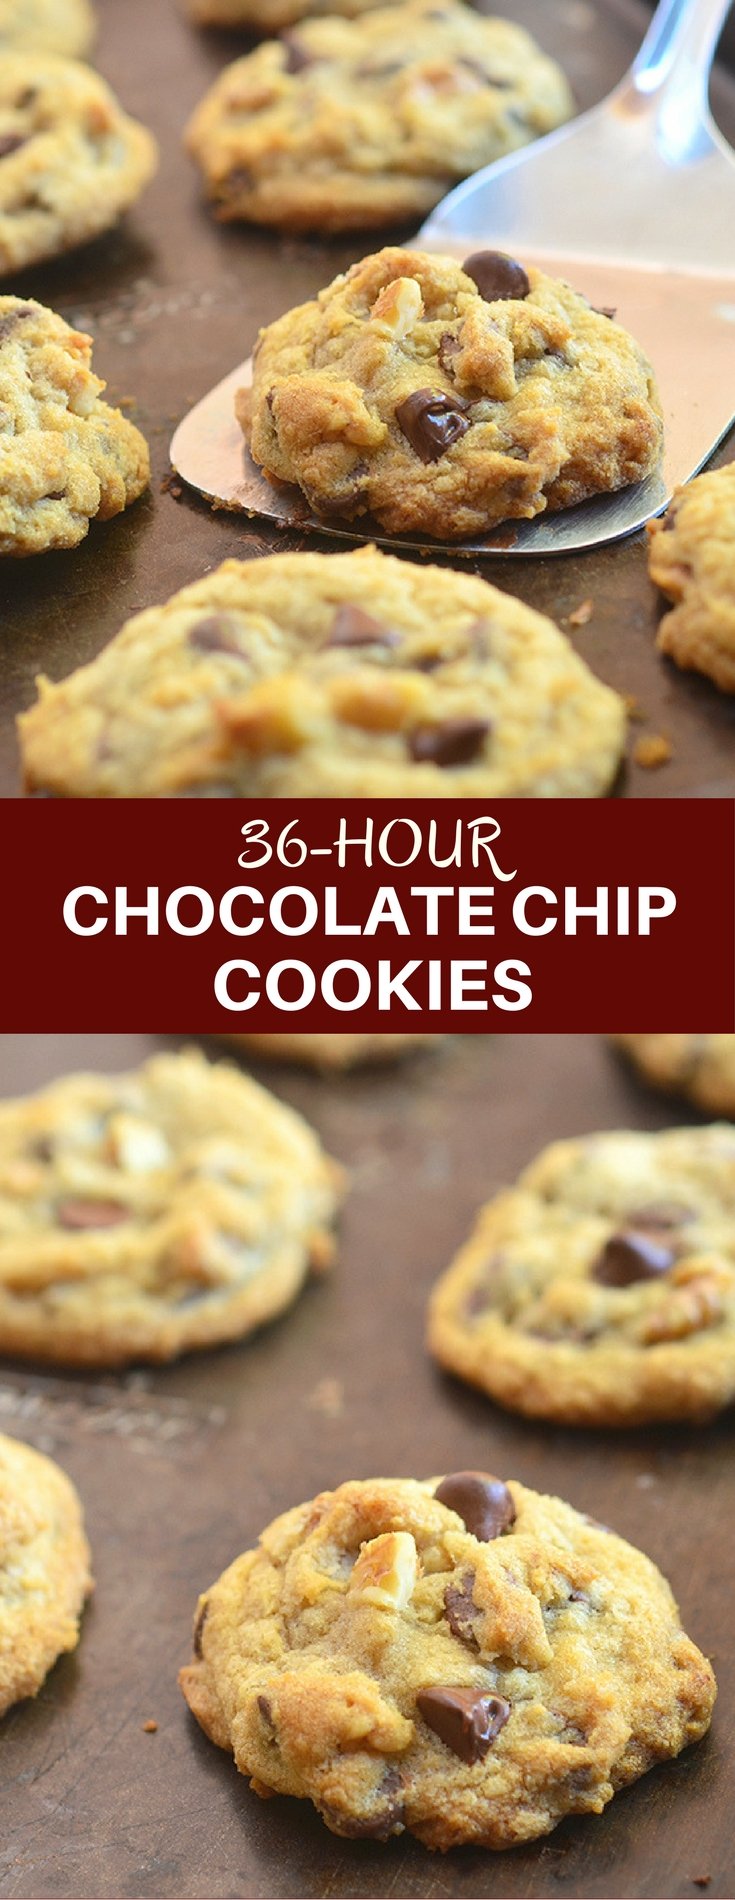 36-hour Chocolate Chip Cookies are soft and moist, chunky and chewy for a whole new level of yum. Truly the best cookies ever and the secret is the chill time! The secret is the chill time!